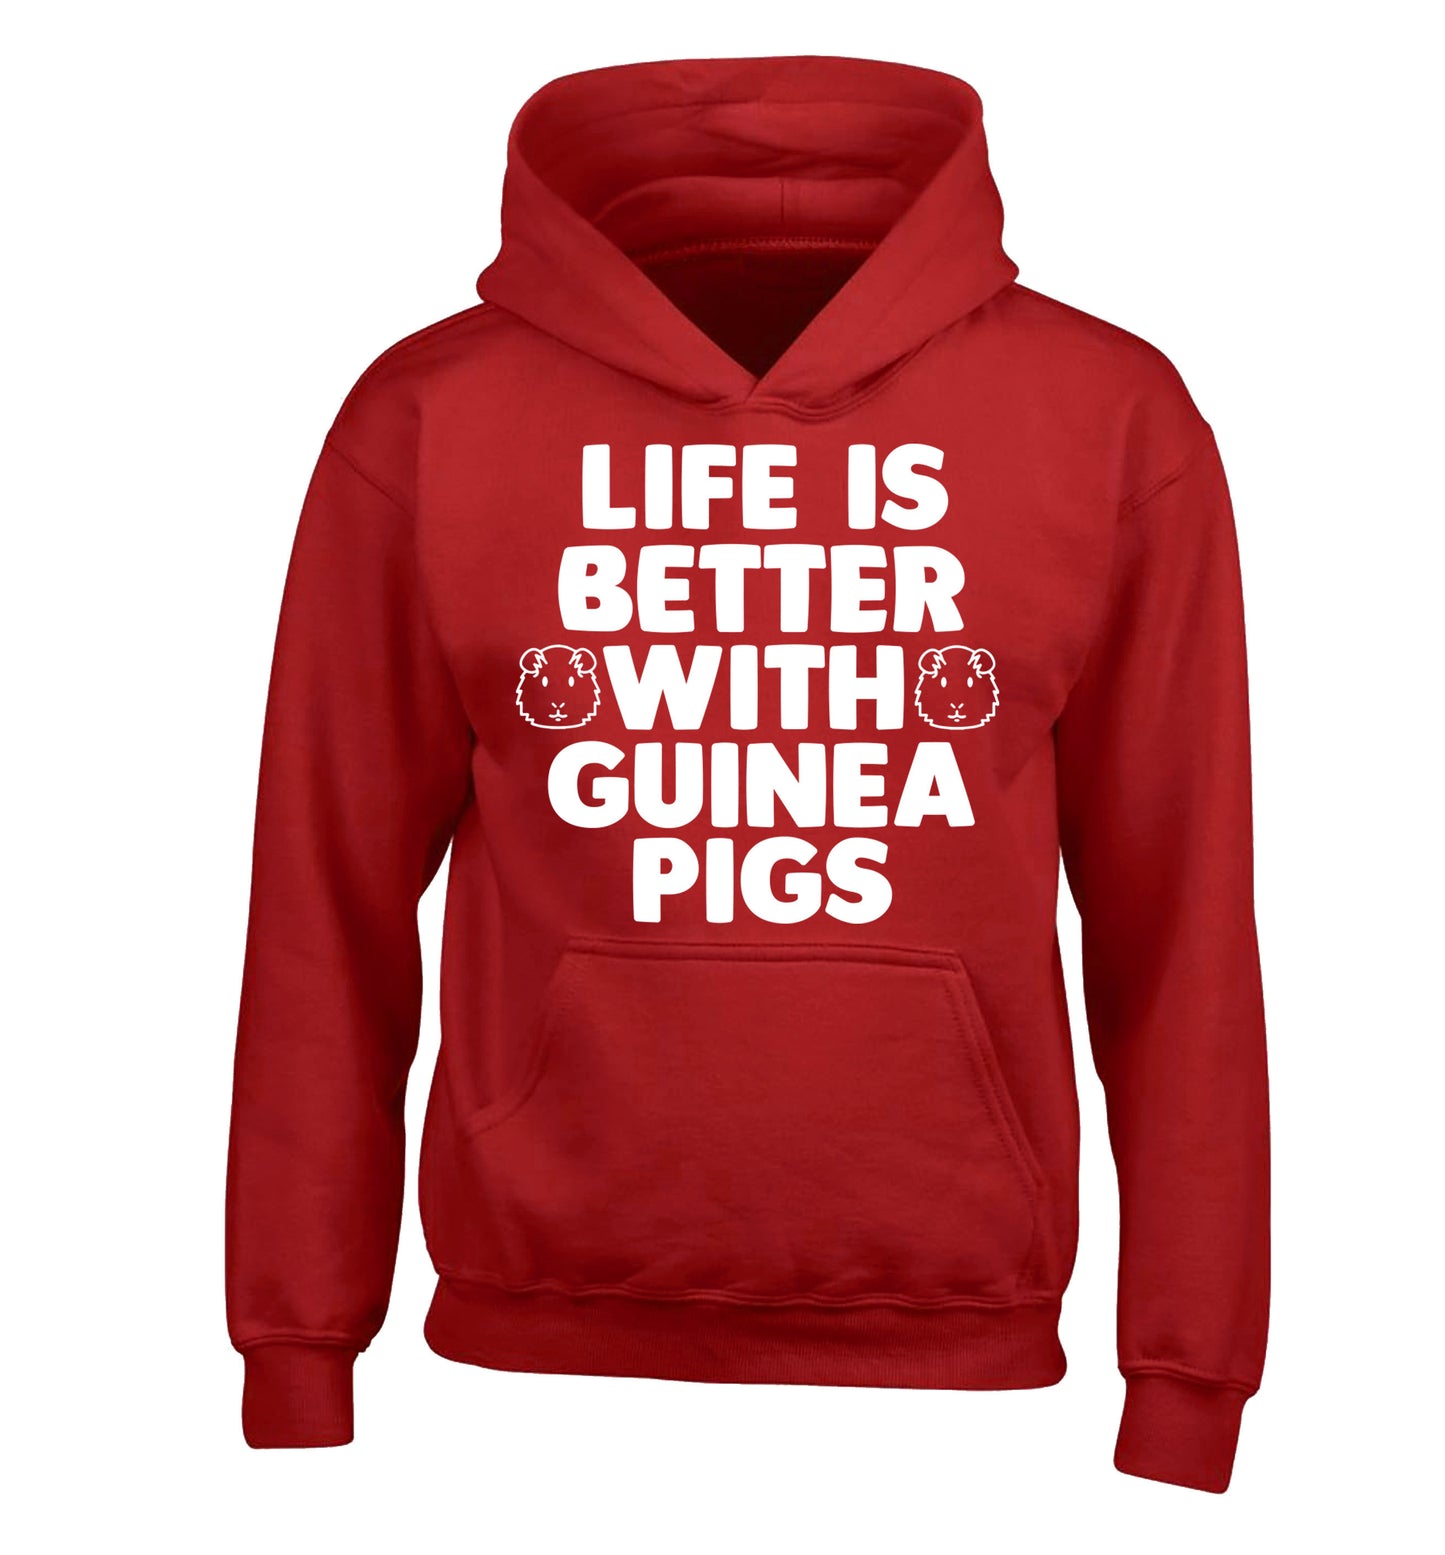 Life is better with guinea pigs children's red hoodie 12-14 Years